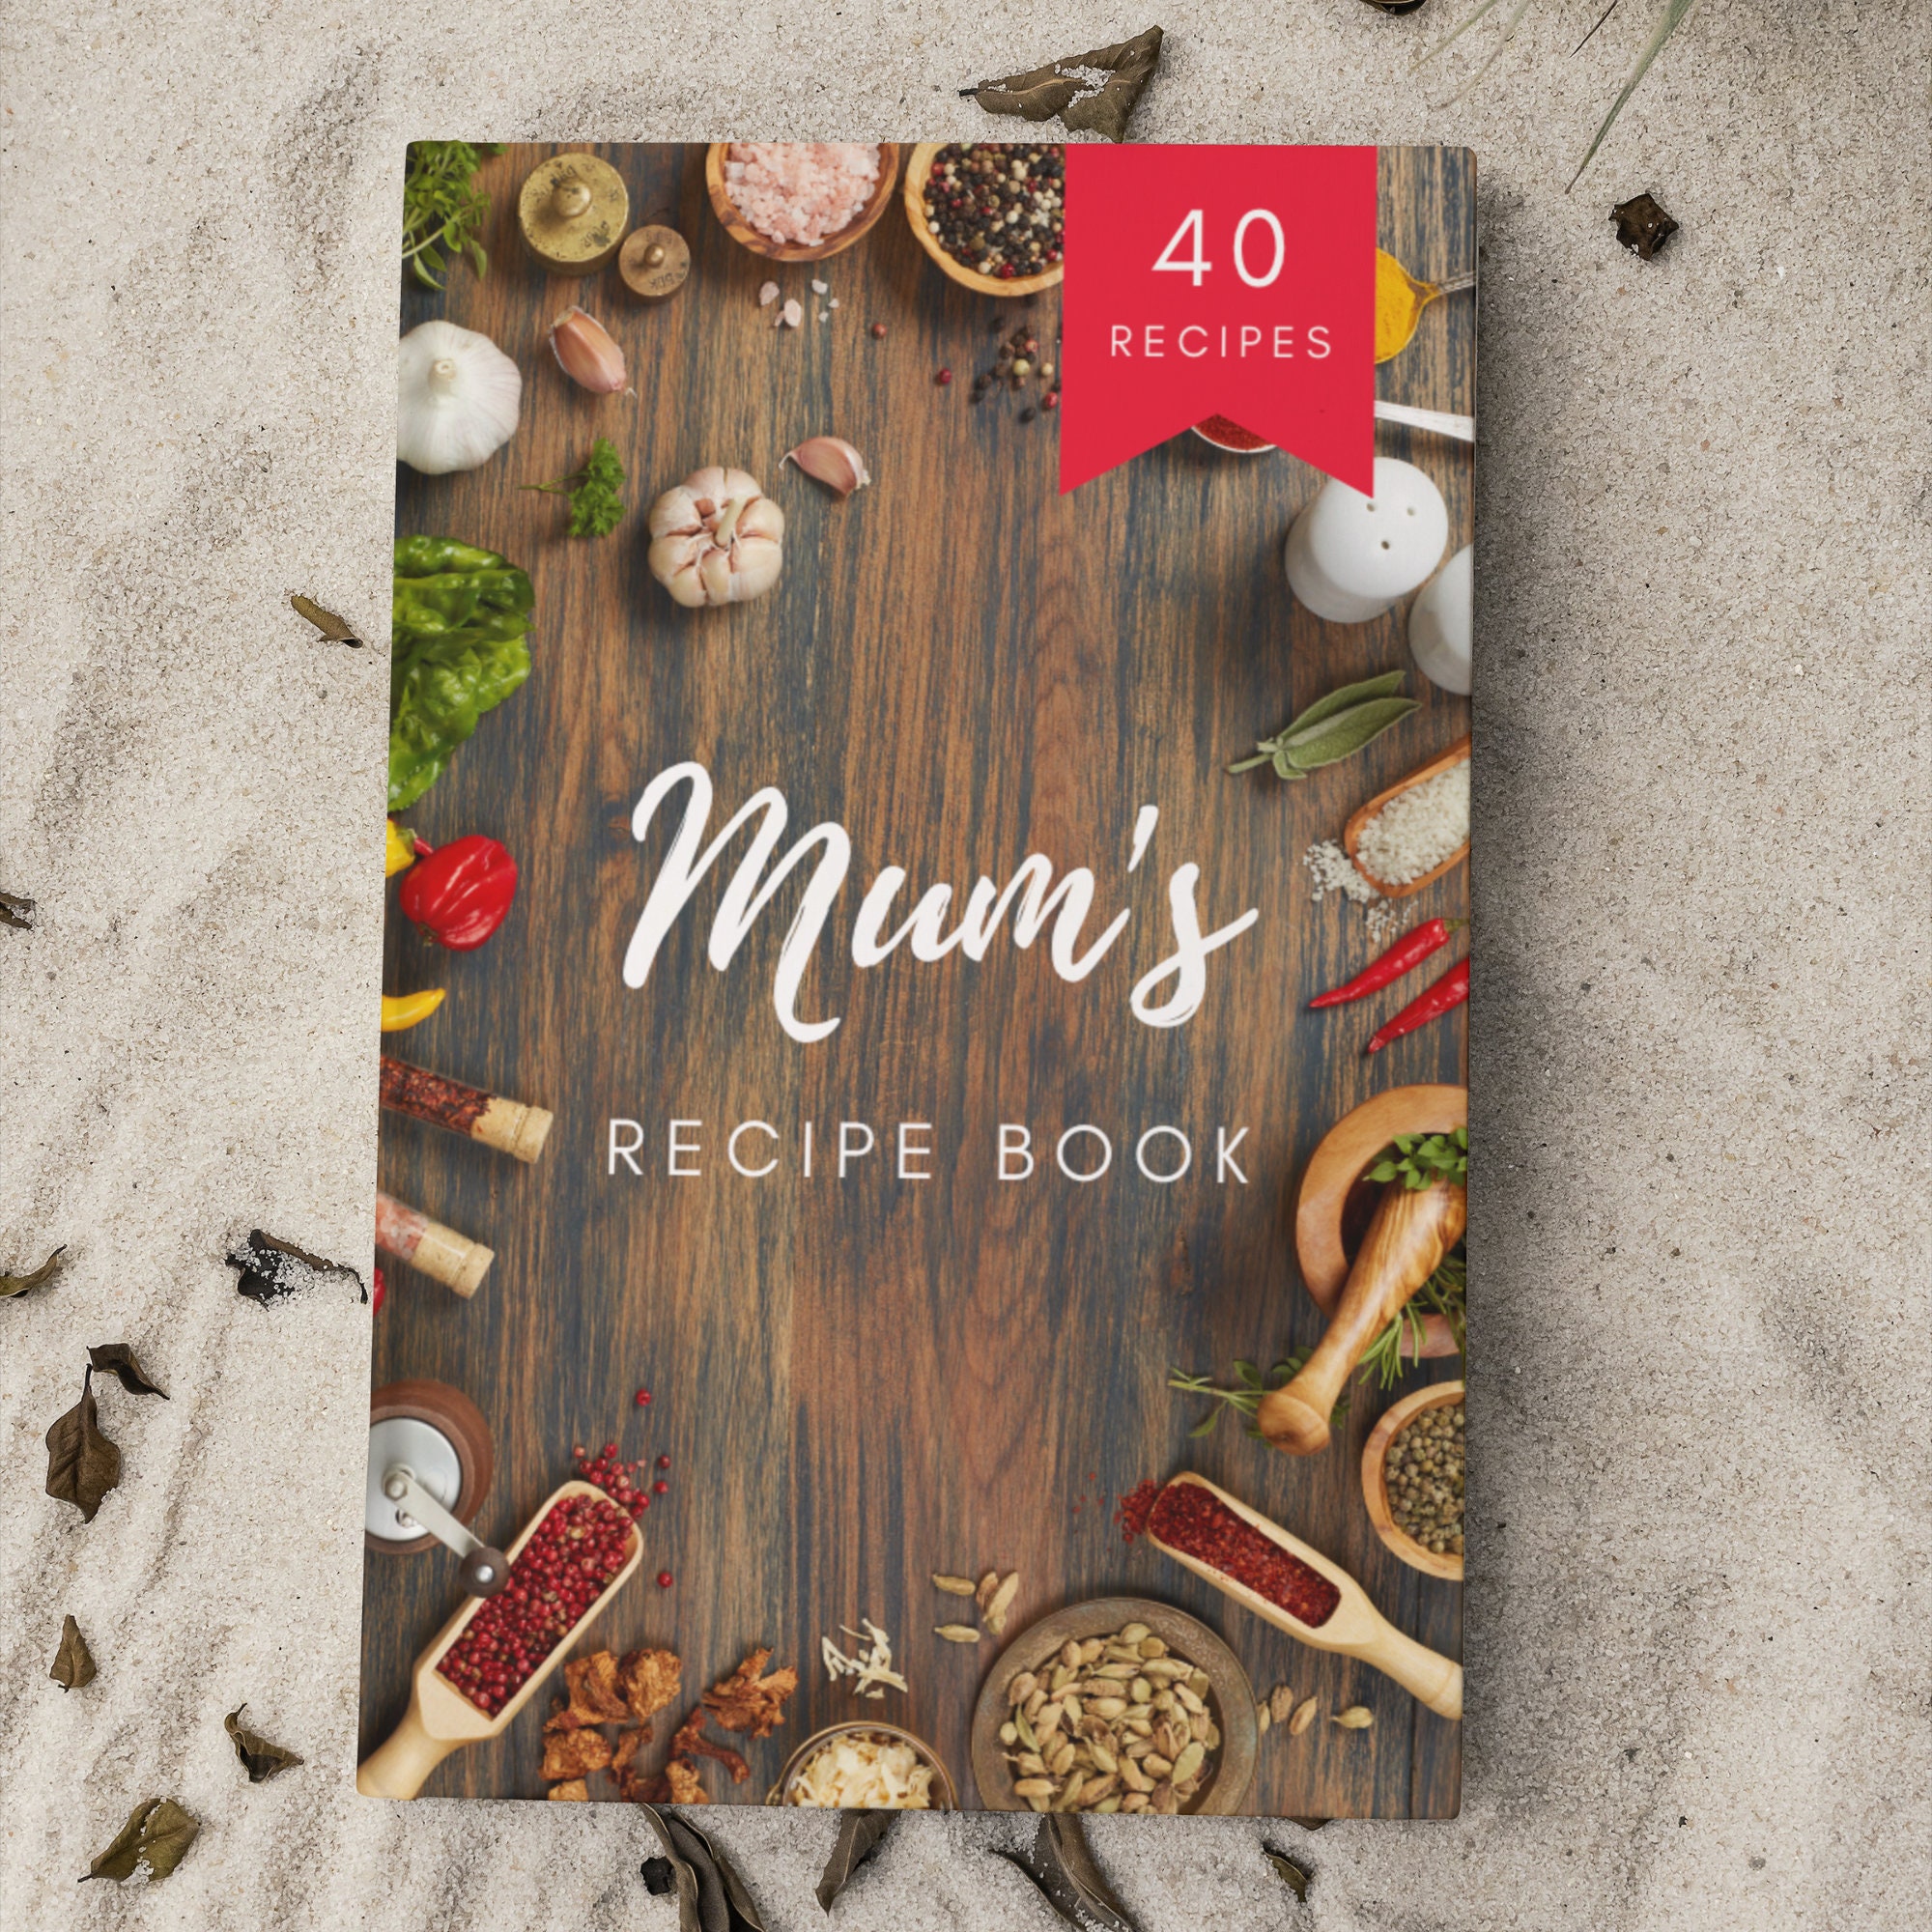 Recipe Book to Write in Your Own Recipes Graphic by Abderrazak Srd